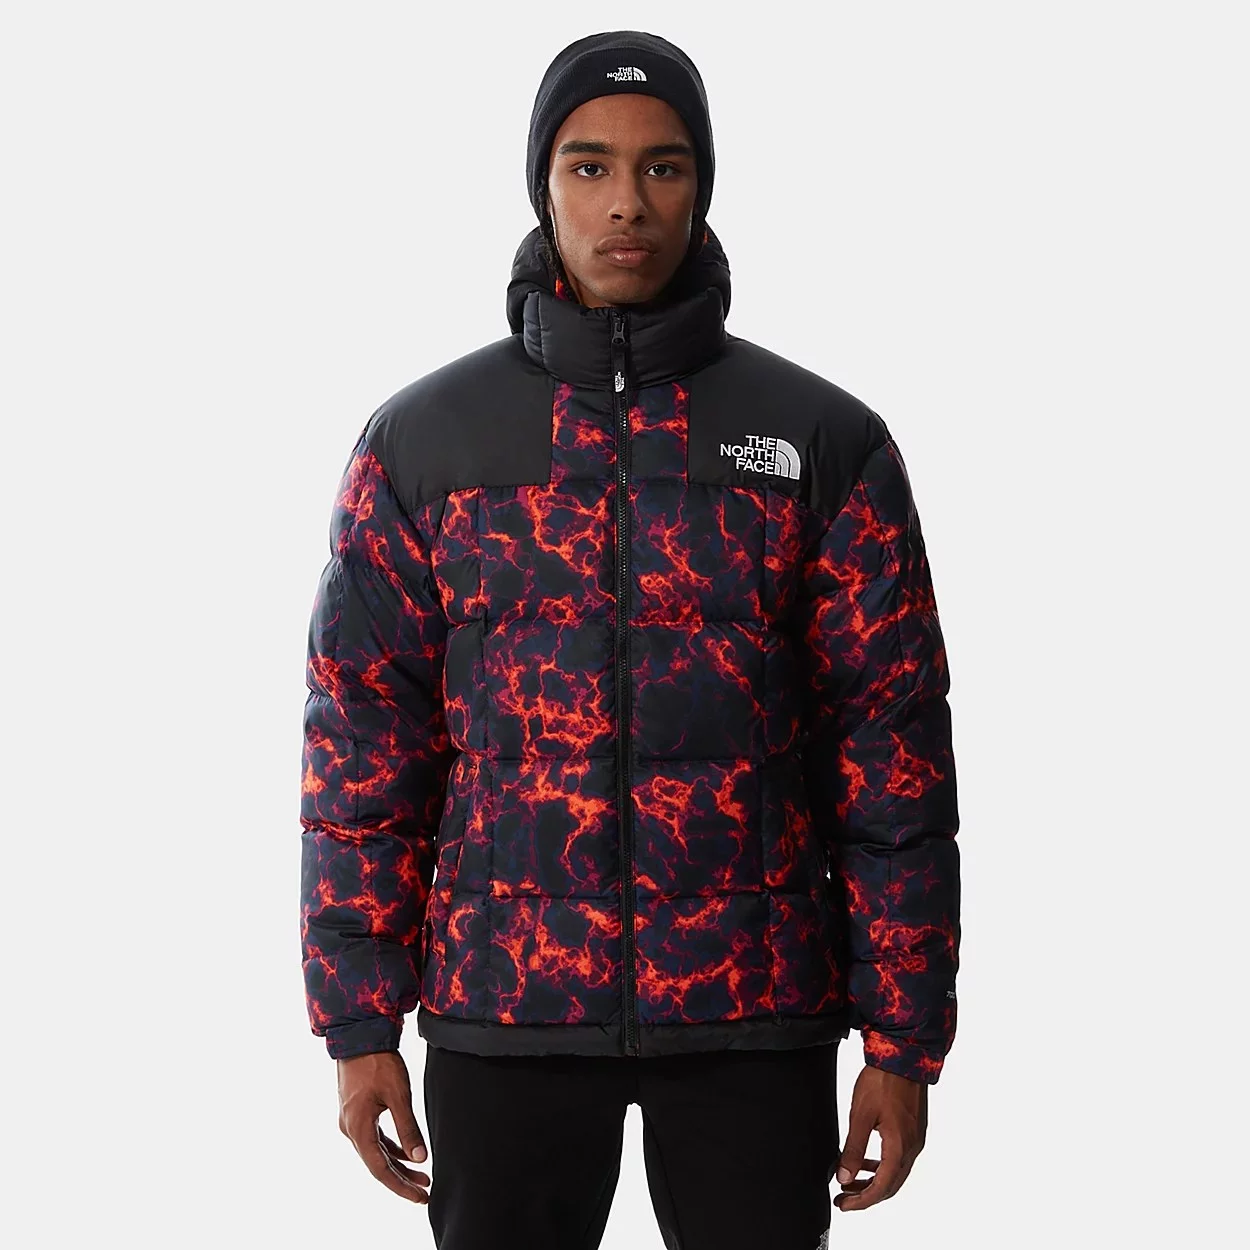 The North Face puffer lhotse reversible jacket in black